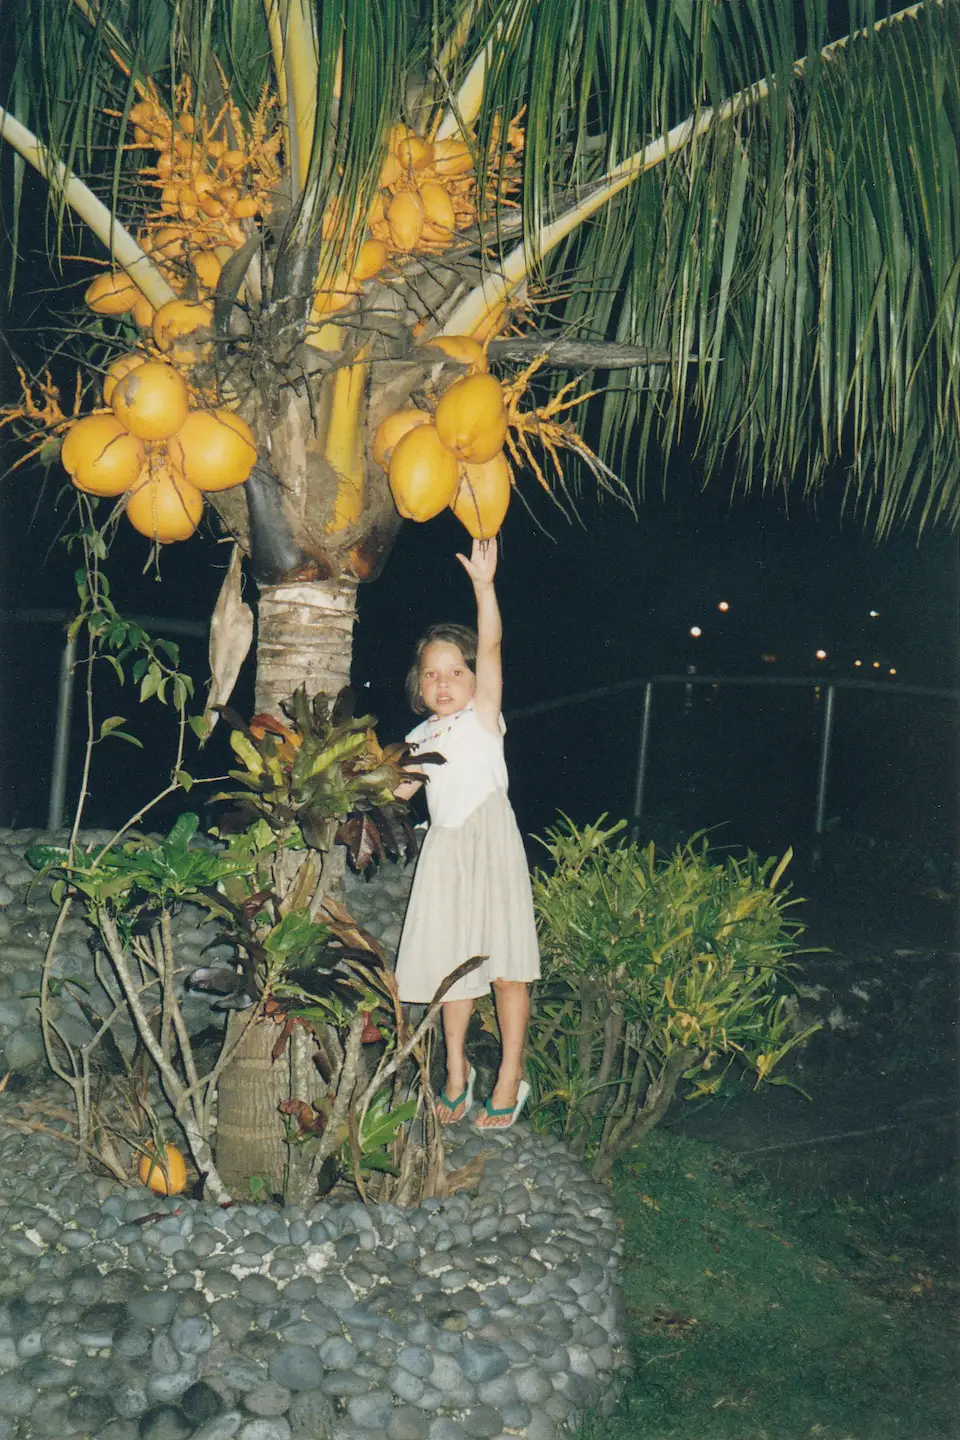 An old photo of a child reaching up towards a bunch of coconuts in Samoa.